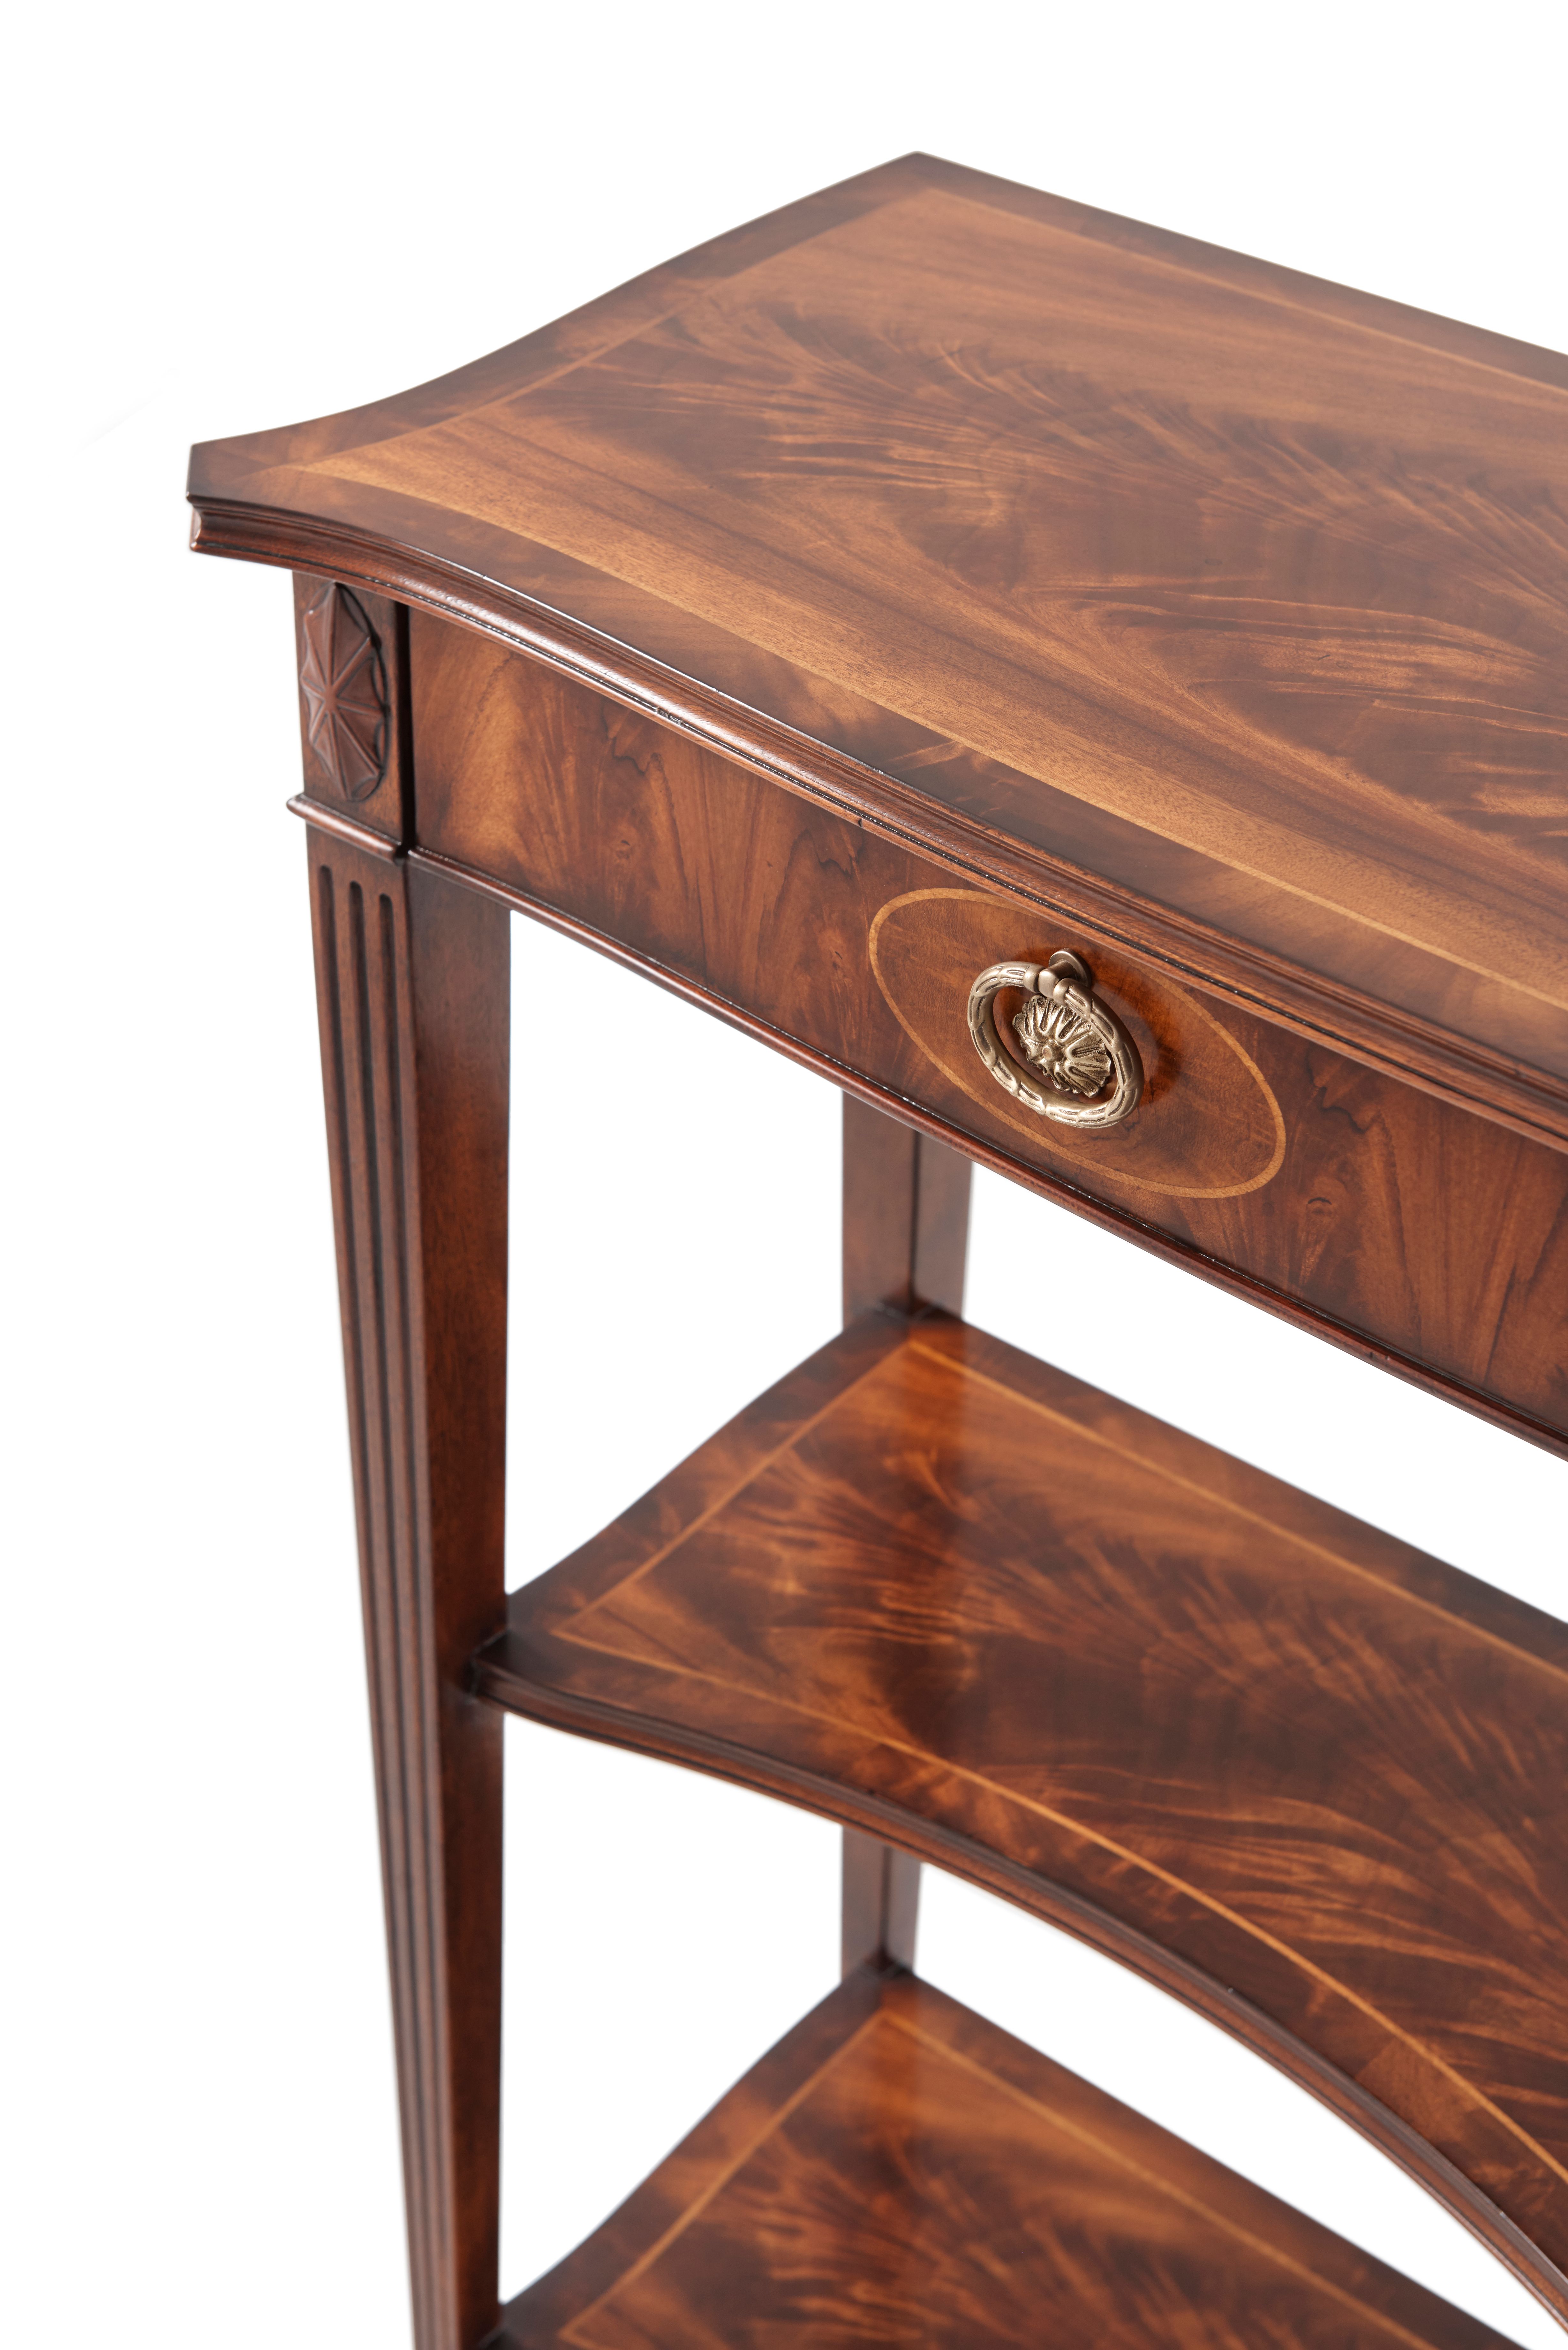 THE AUDLEY STREET CONSOLE TABLE